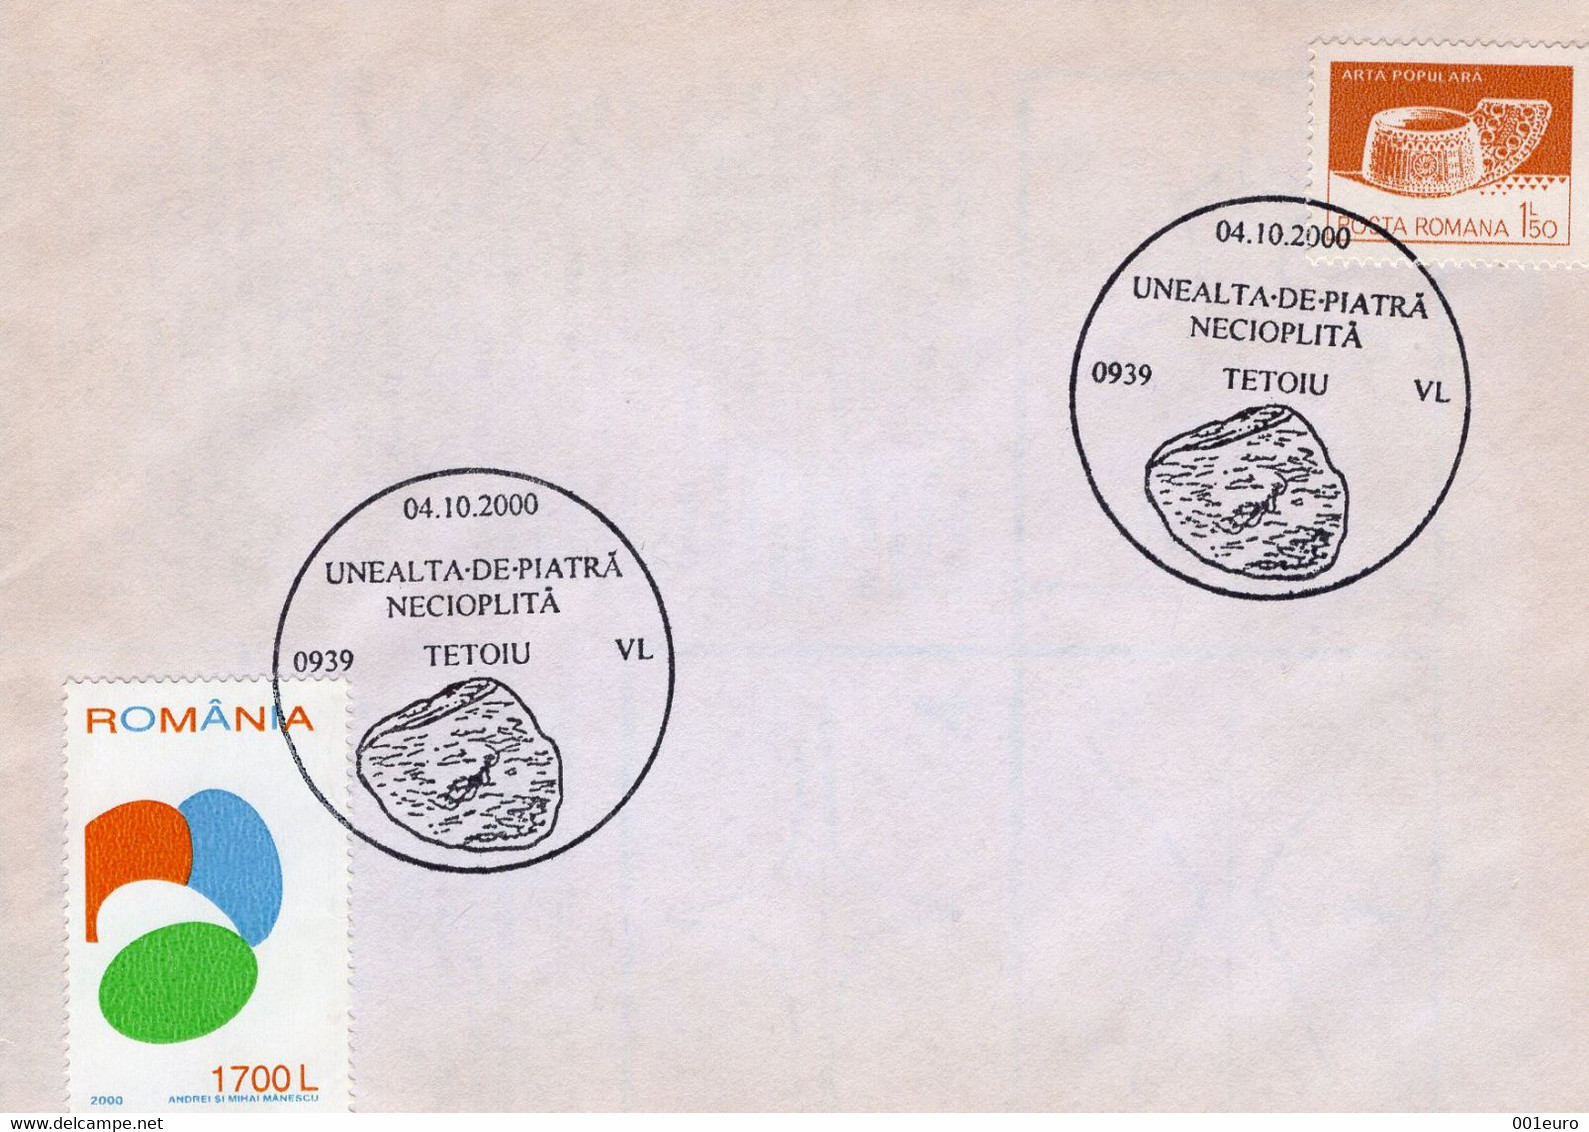 ROMANIA 2000: STONE AGE TOOL Illustrated Postmark - Registered Shipping! - Poststempel (Marcophilie)